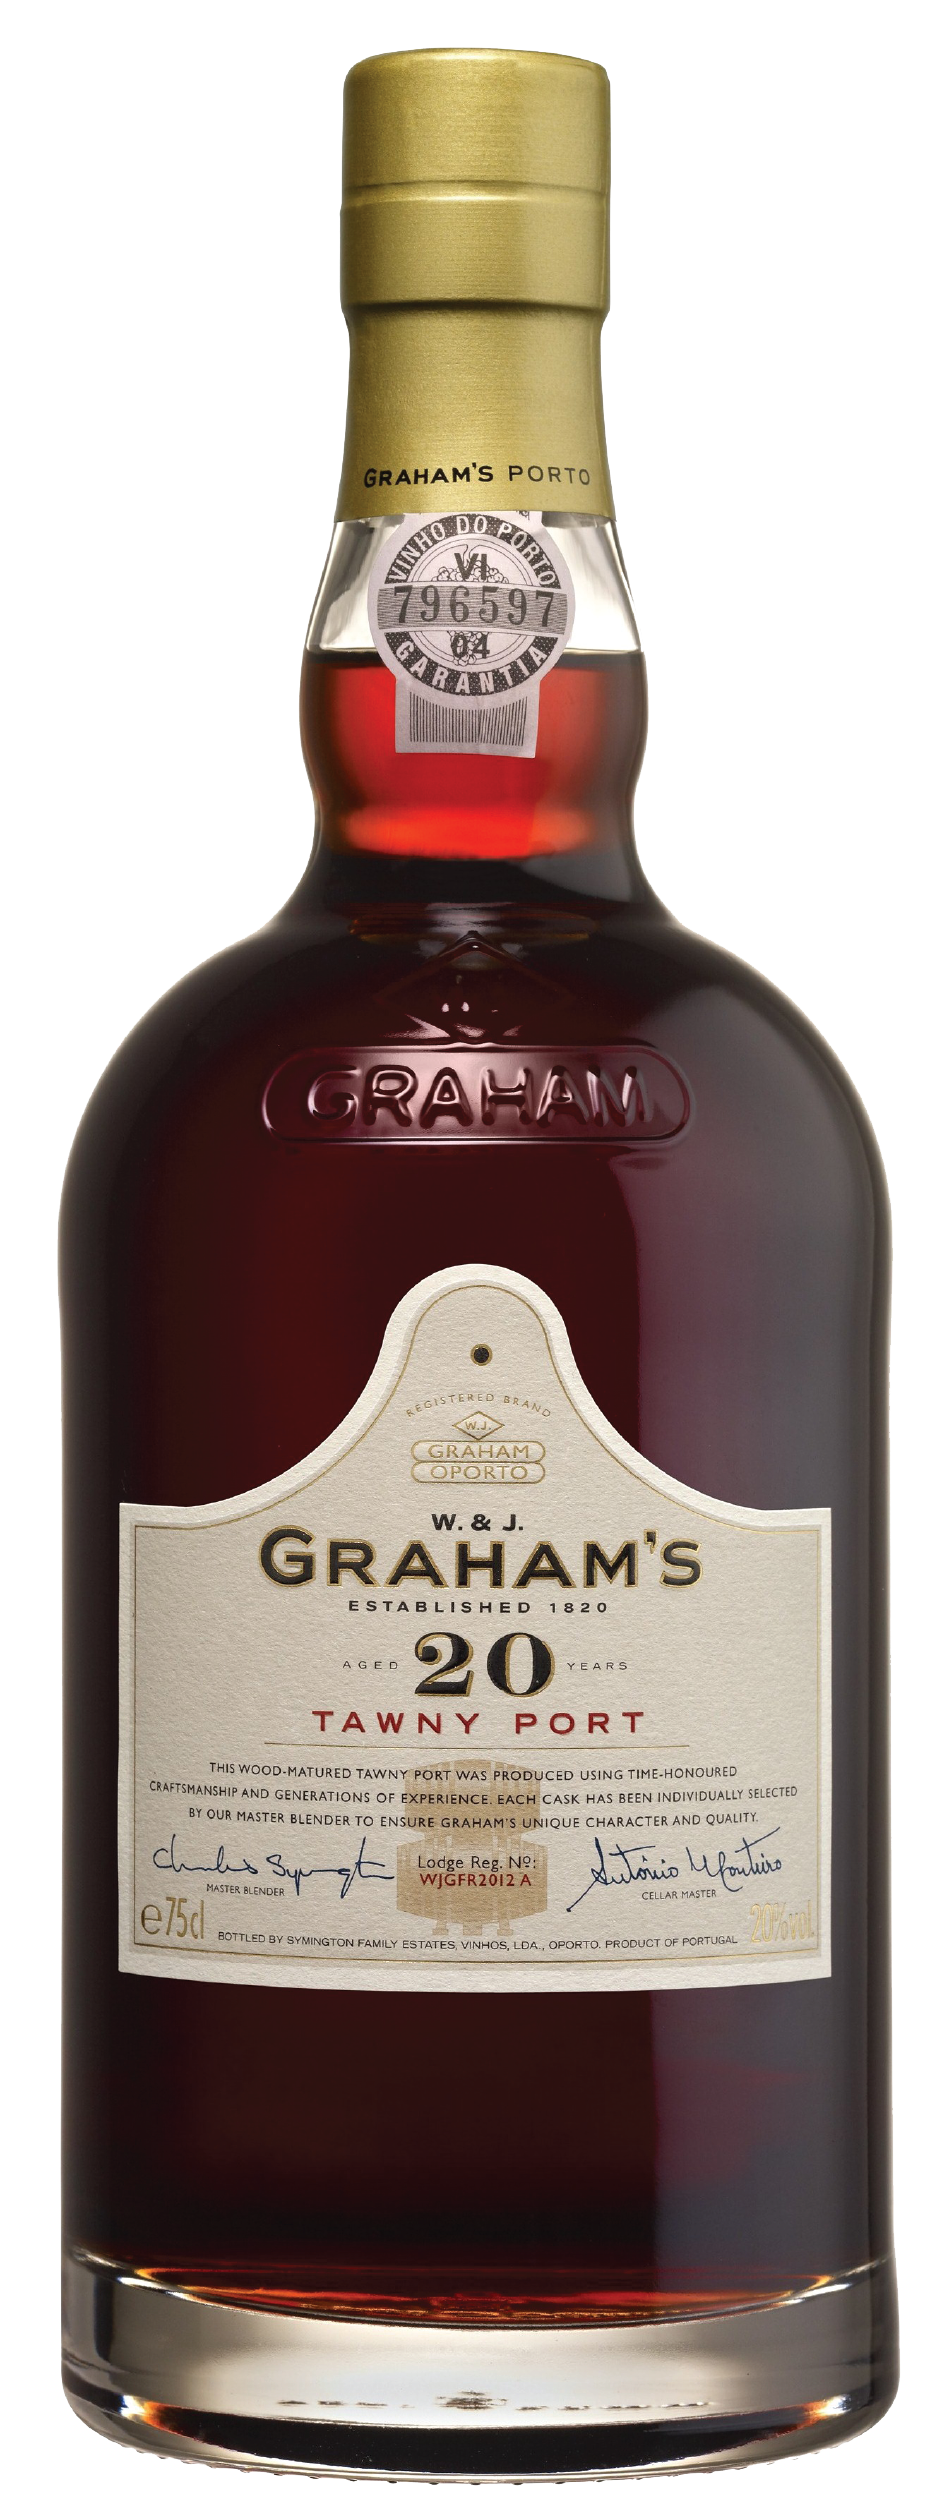 Product Image for GRAHAM'S 20 YEAR OLD TAWNY PORT